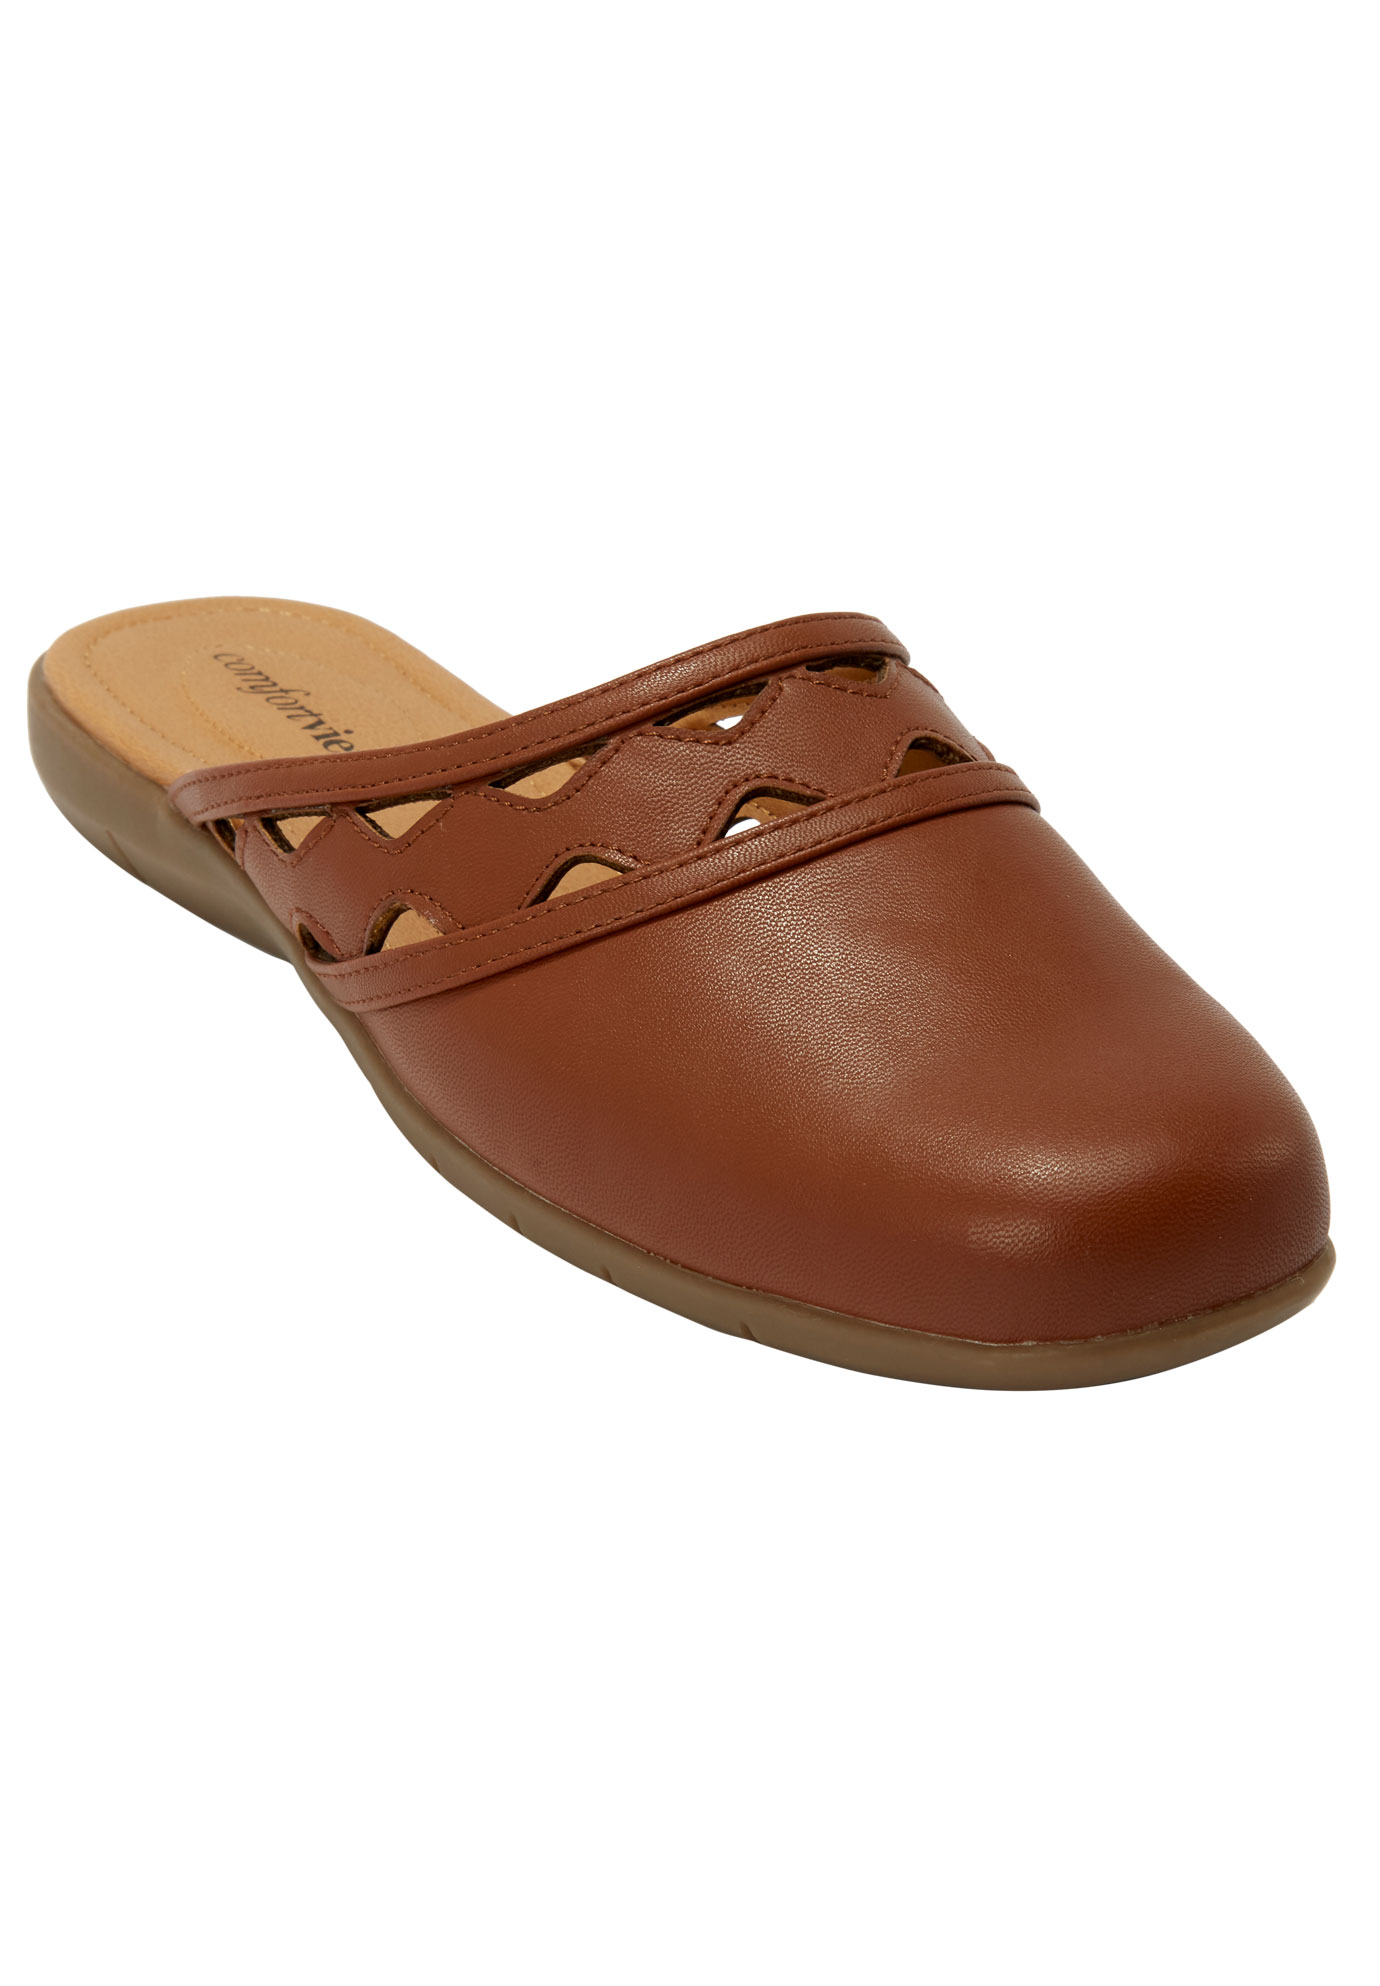 Comfortview Women's Wide Width The Mckenna Slip On Mule Shoes - image 1 of 7